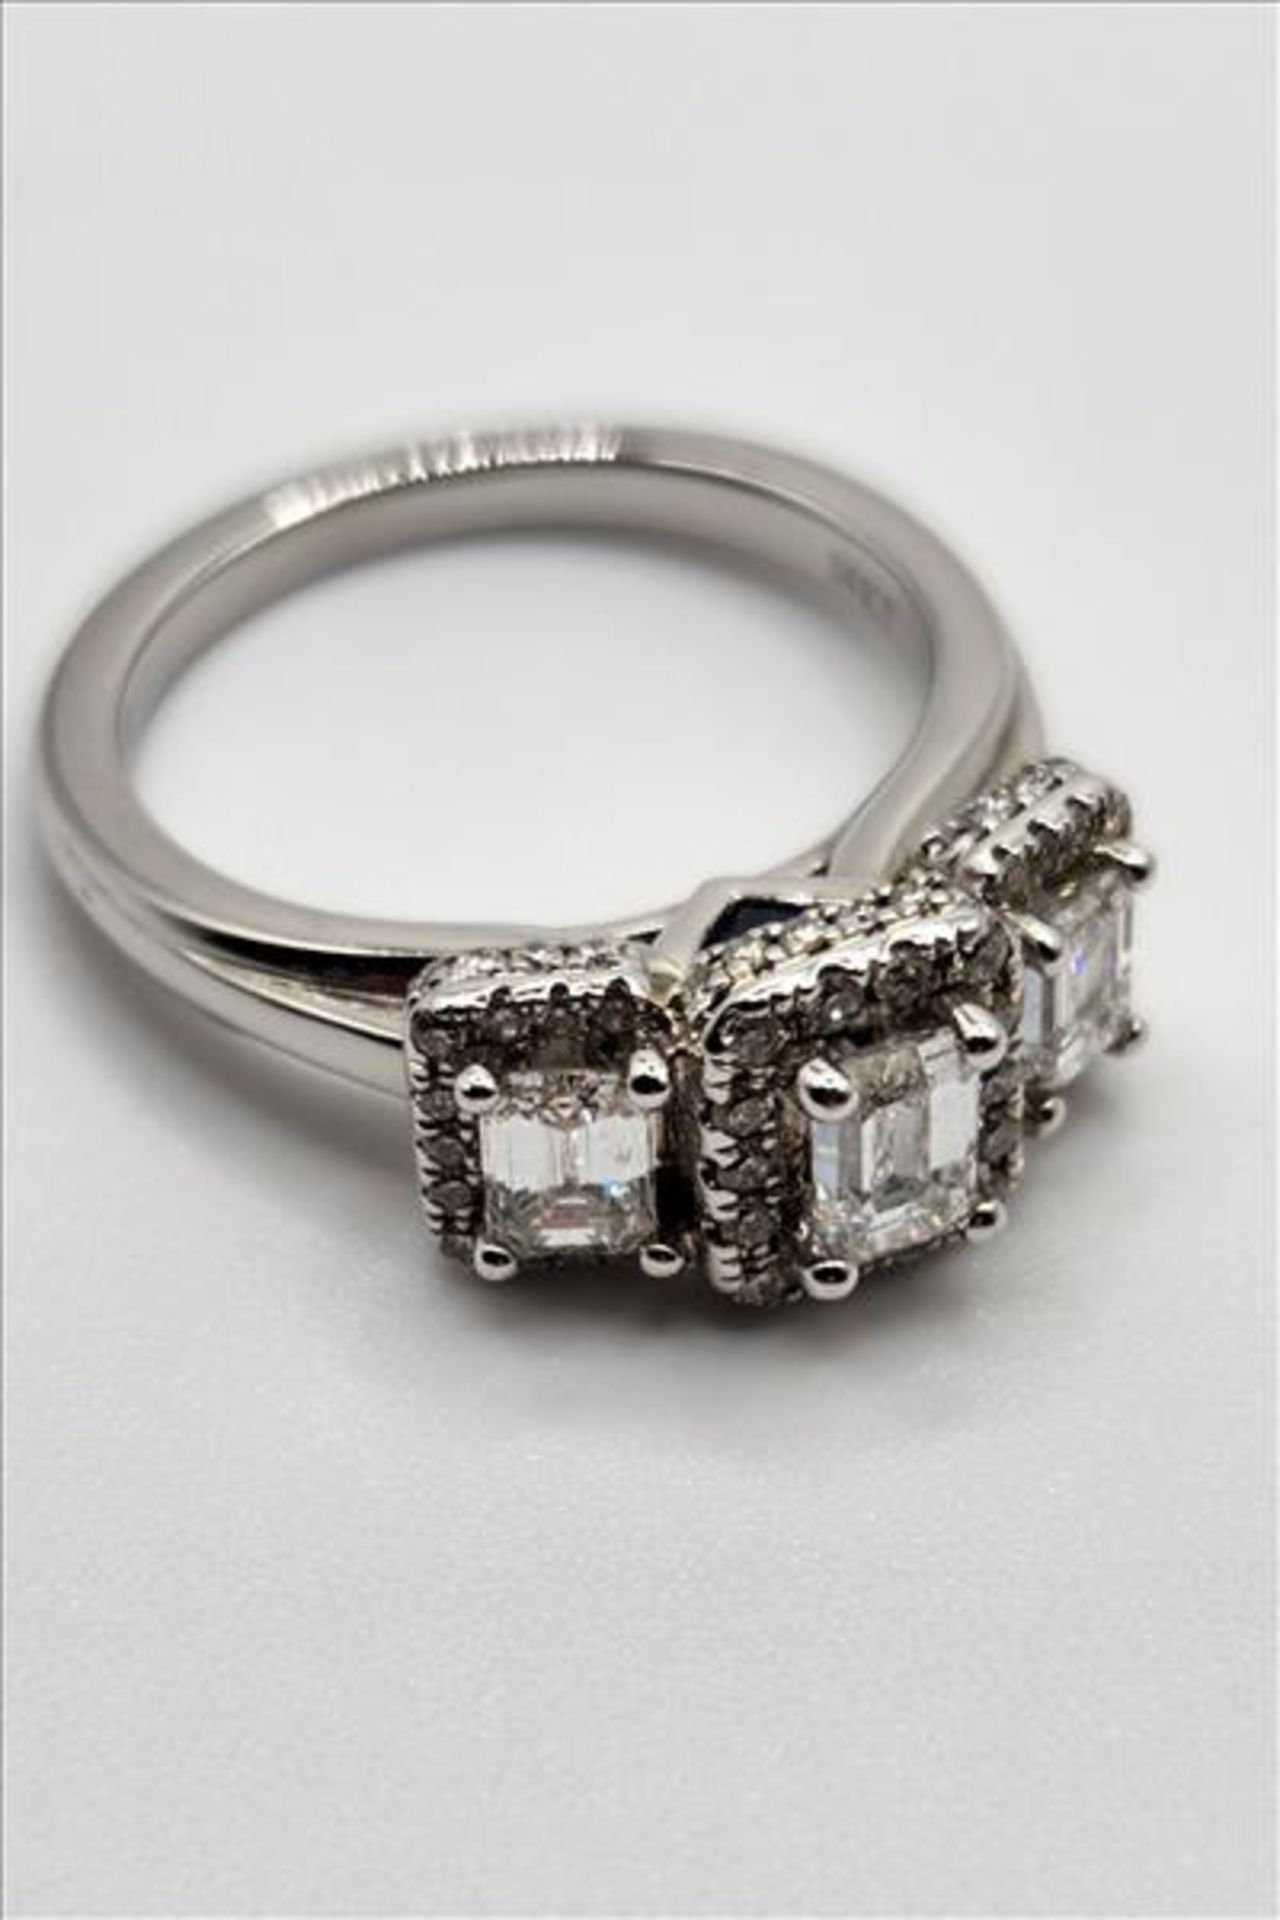 One lady’s stamped and tested 14kt VERA WANG LOVE collection diamond ring. Contained across the